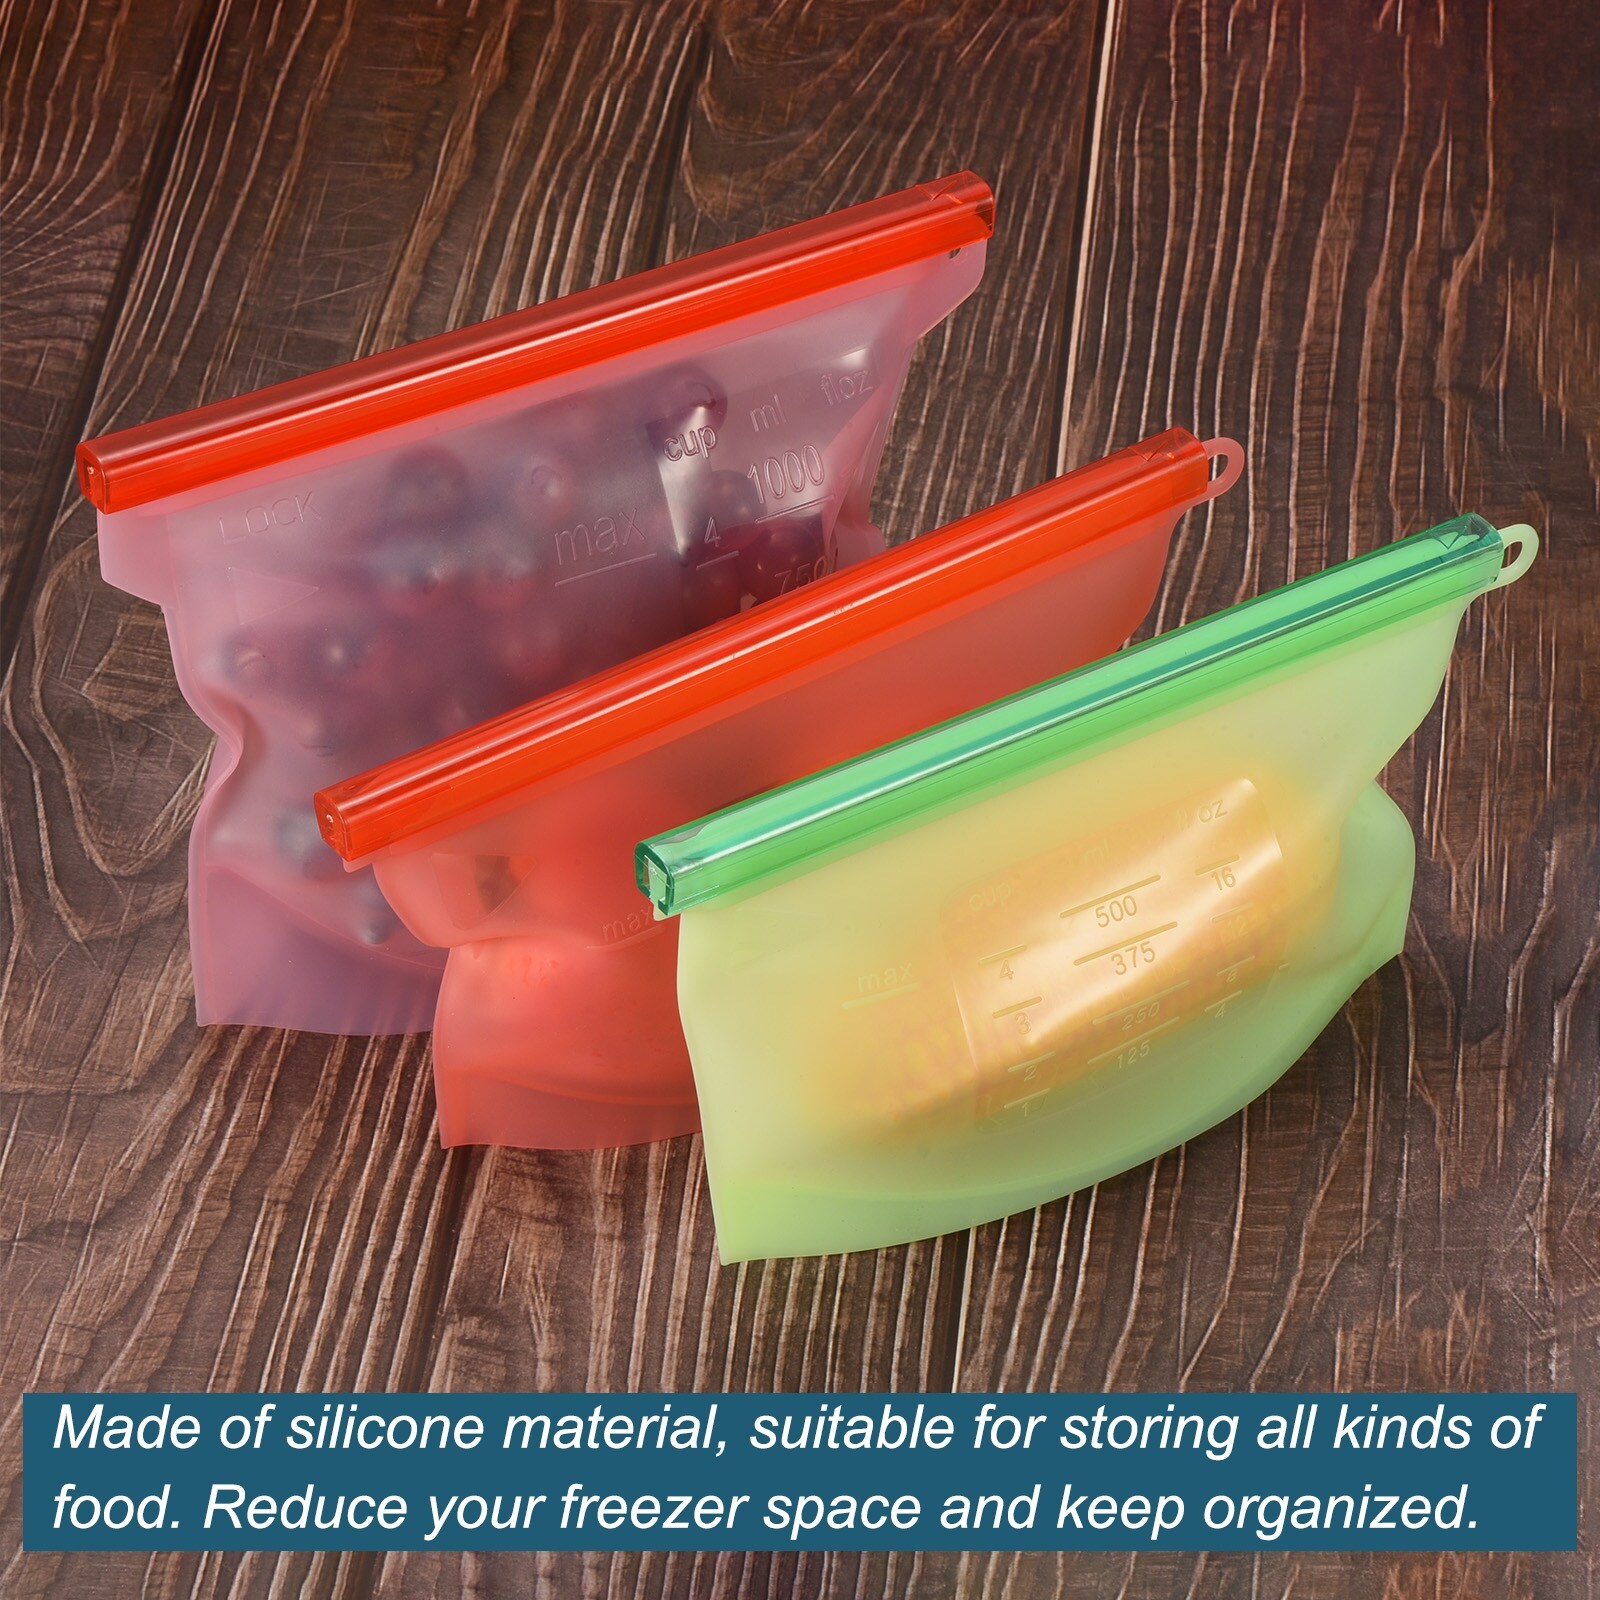 https://ak1.ostkcdn.com/images/products/is/images/direct/e44a244e070ccb650cb91bd9a18a2eedbbd5eb3a/Silicone-Food-Storage-Containers-Leakproof-Reusable-Freezer-Bags-White%282PCS%29.jpg